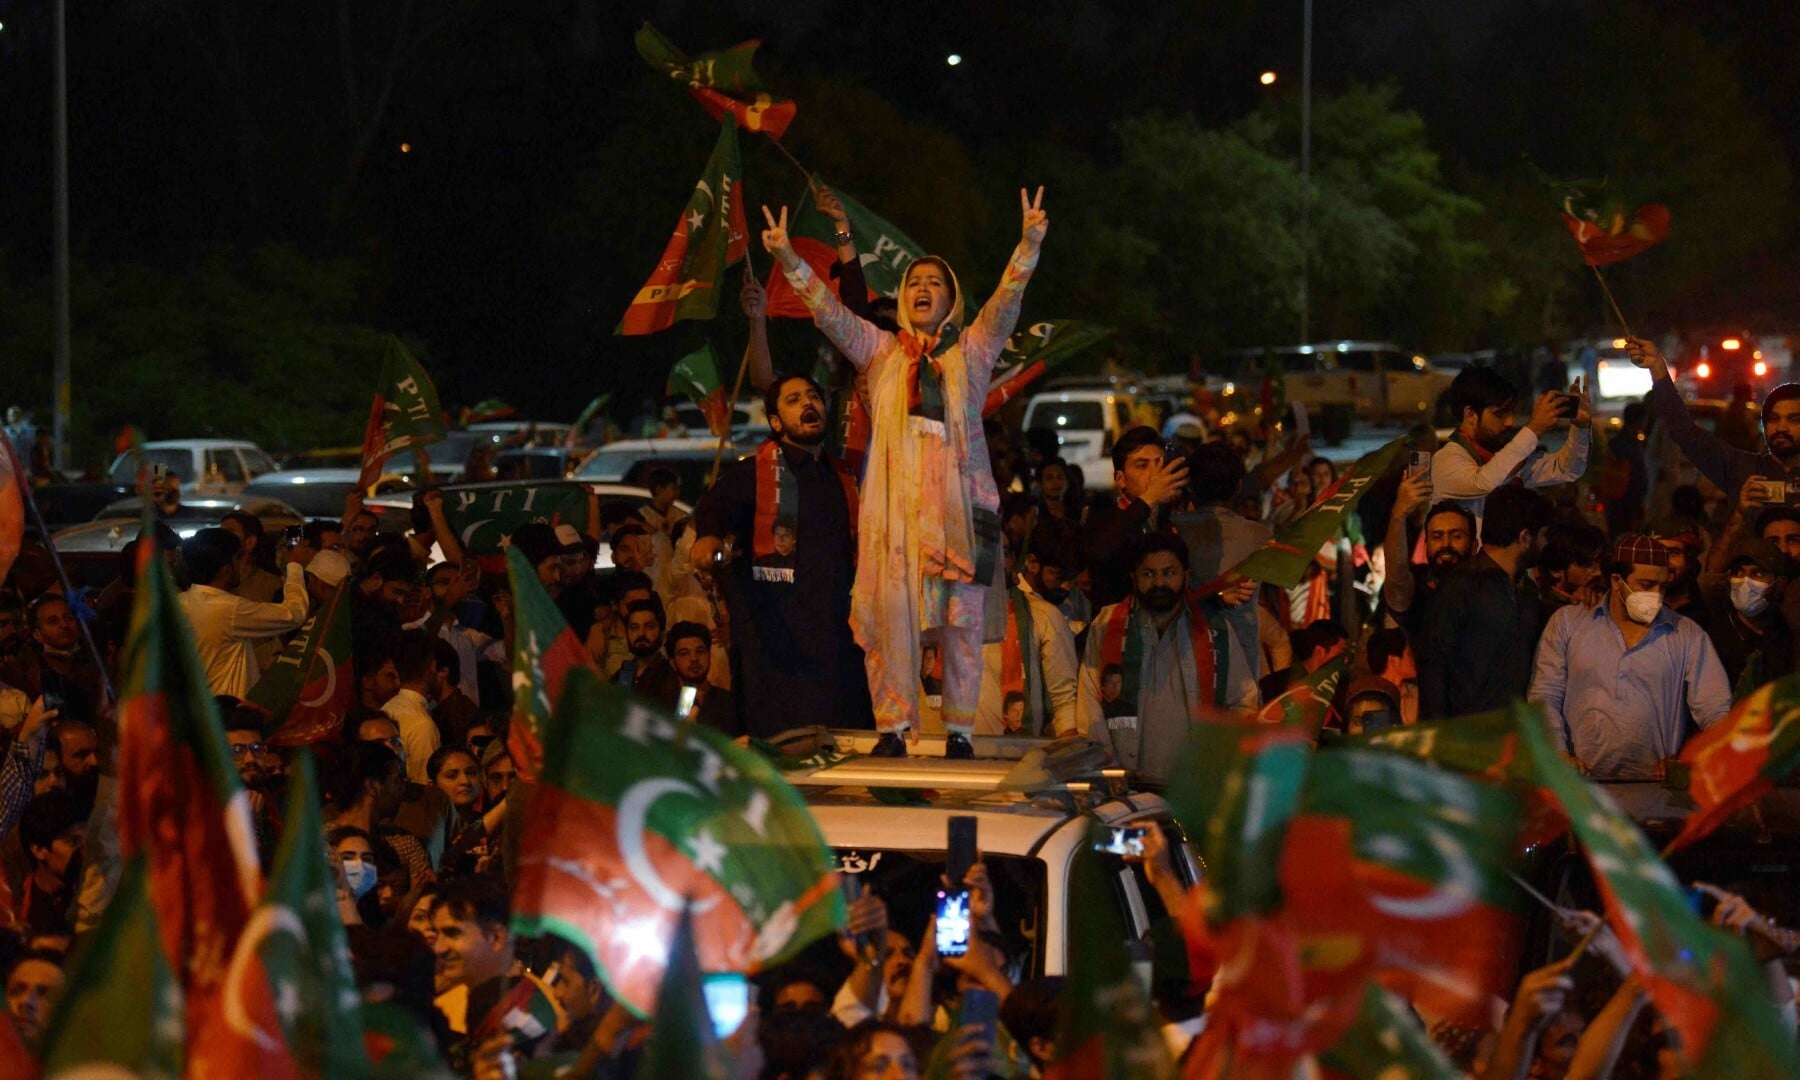 PTI supporters take part in a rally in support of former prime minister Imran Khan in Islamabad on April 10. — AFP